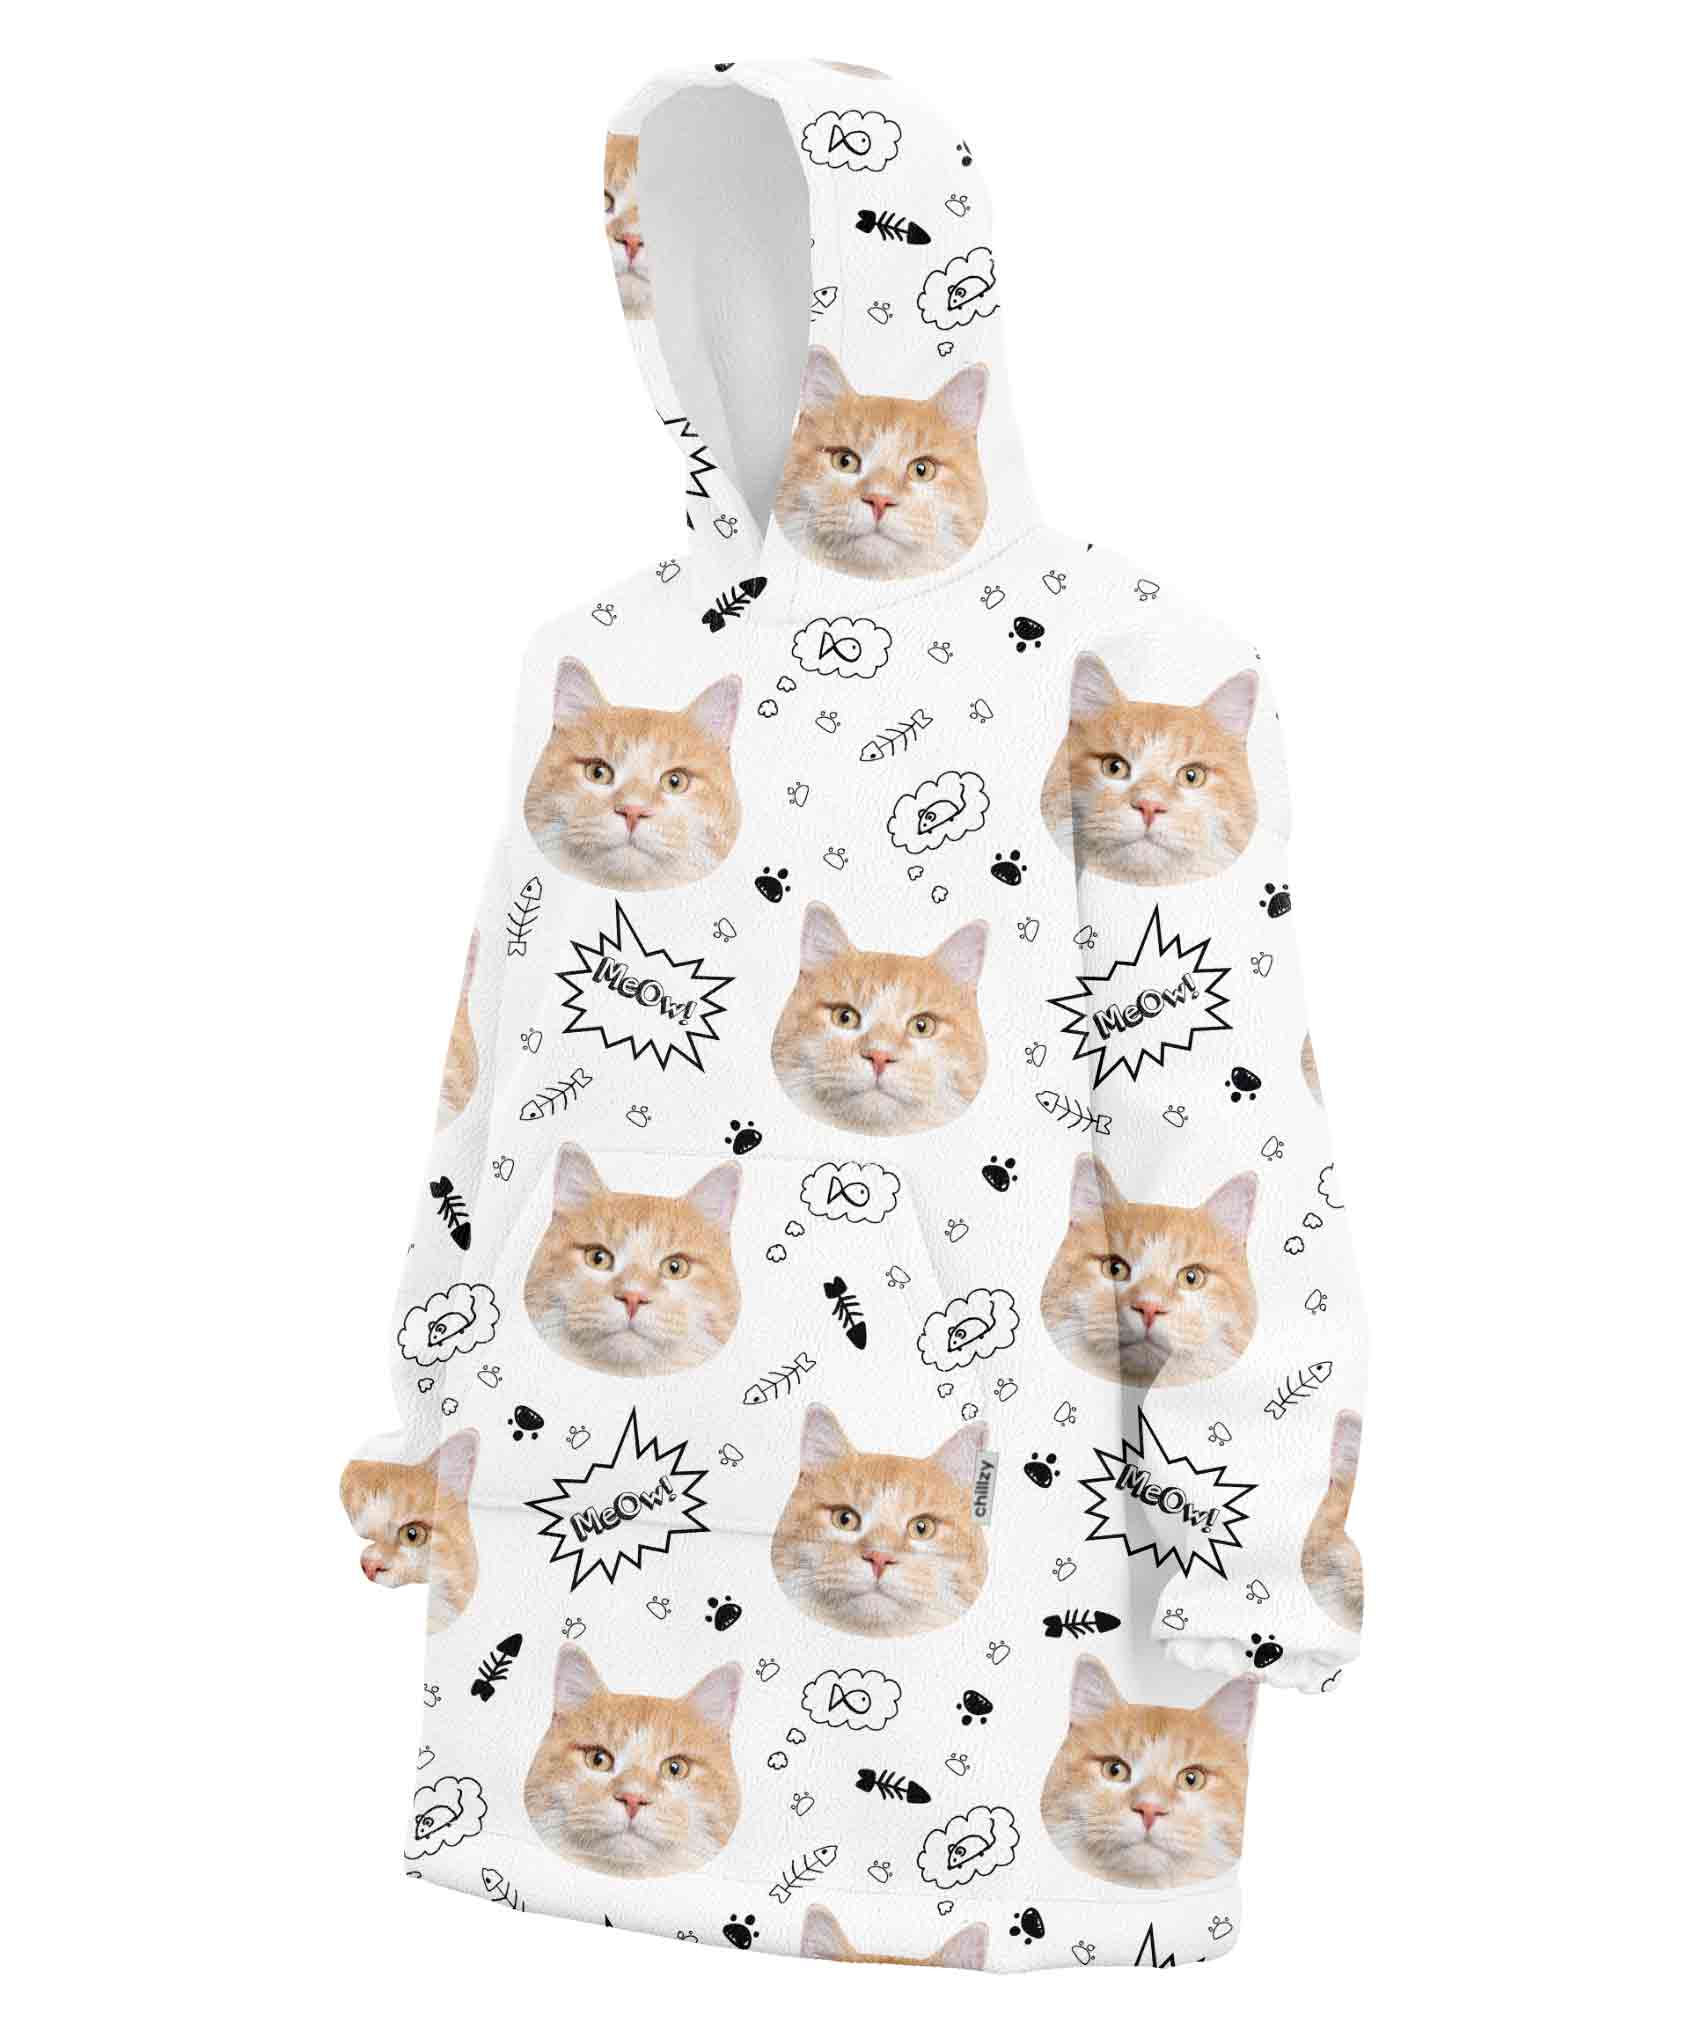 Your Cat Meow Chillzy Hoodie Blanket